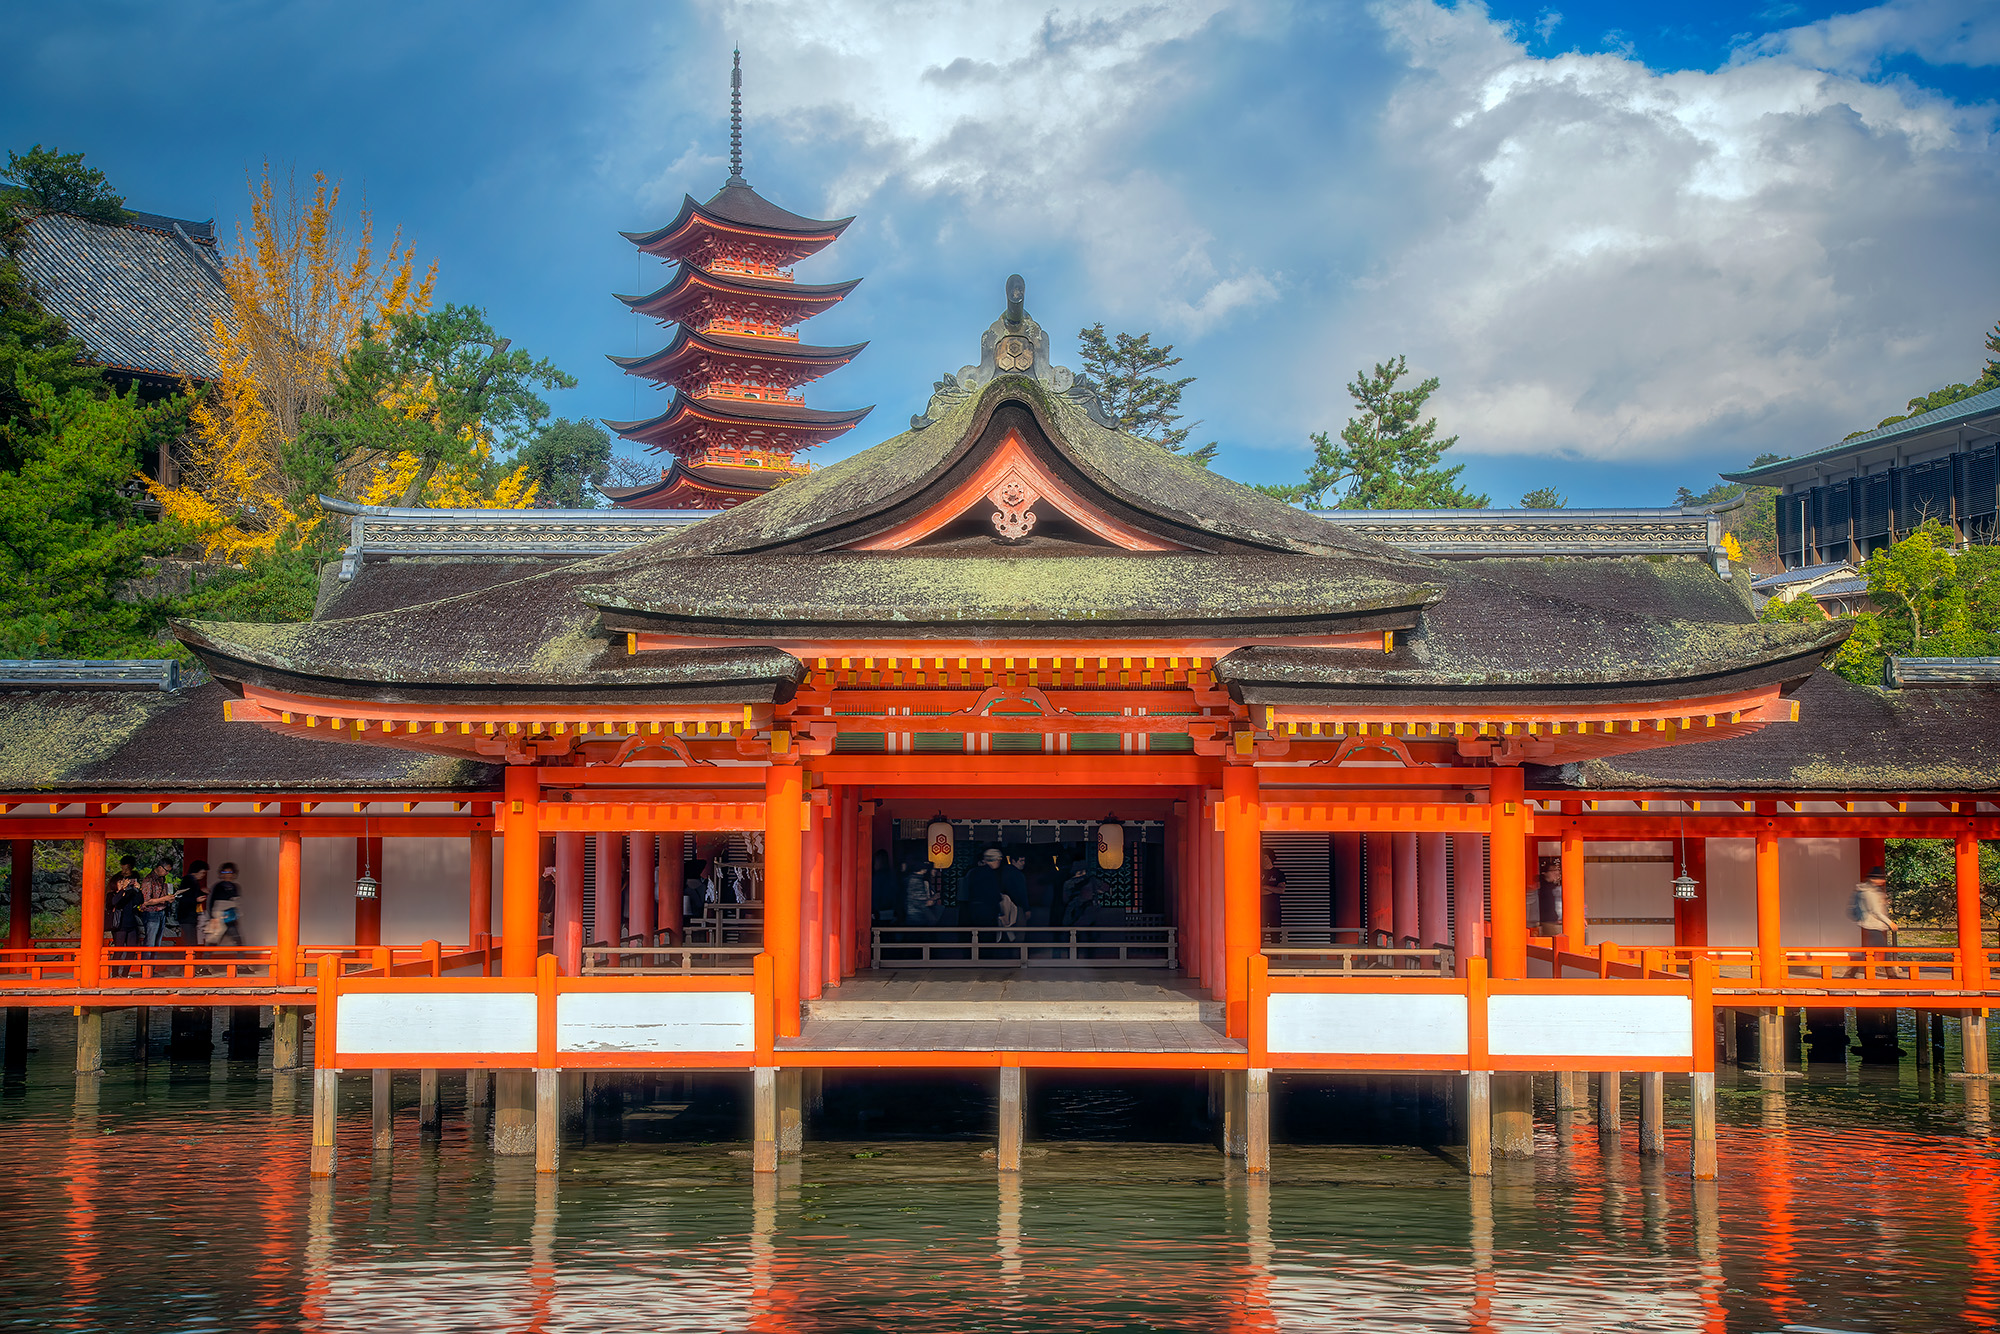 This image captures the beauty of the Itsukushima Jinja Honden Shrine in Miyajima, Japan. The shrine stands proudly on the waterfront...